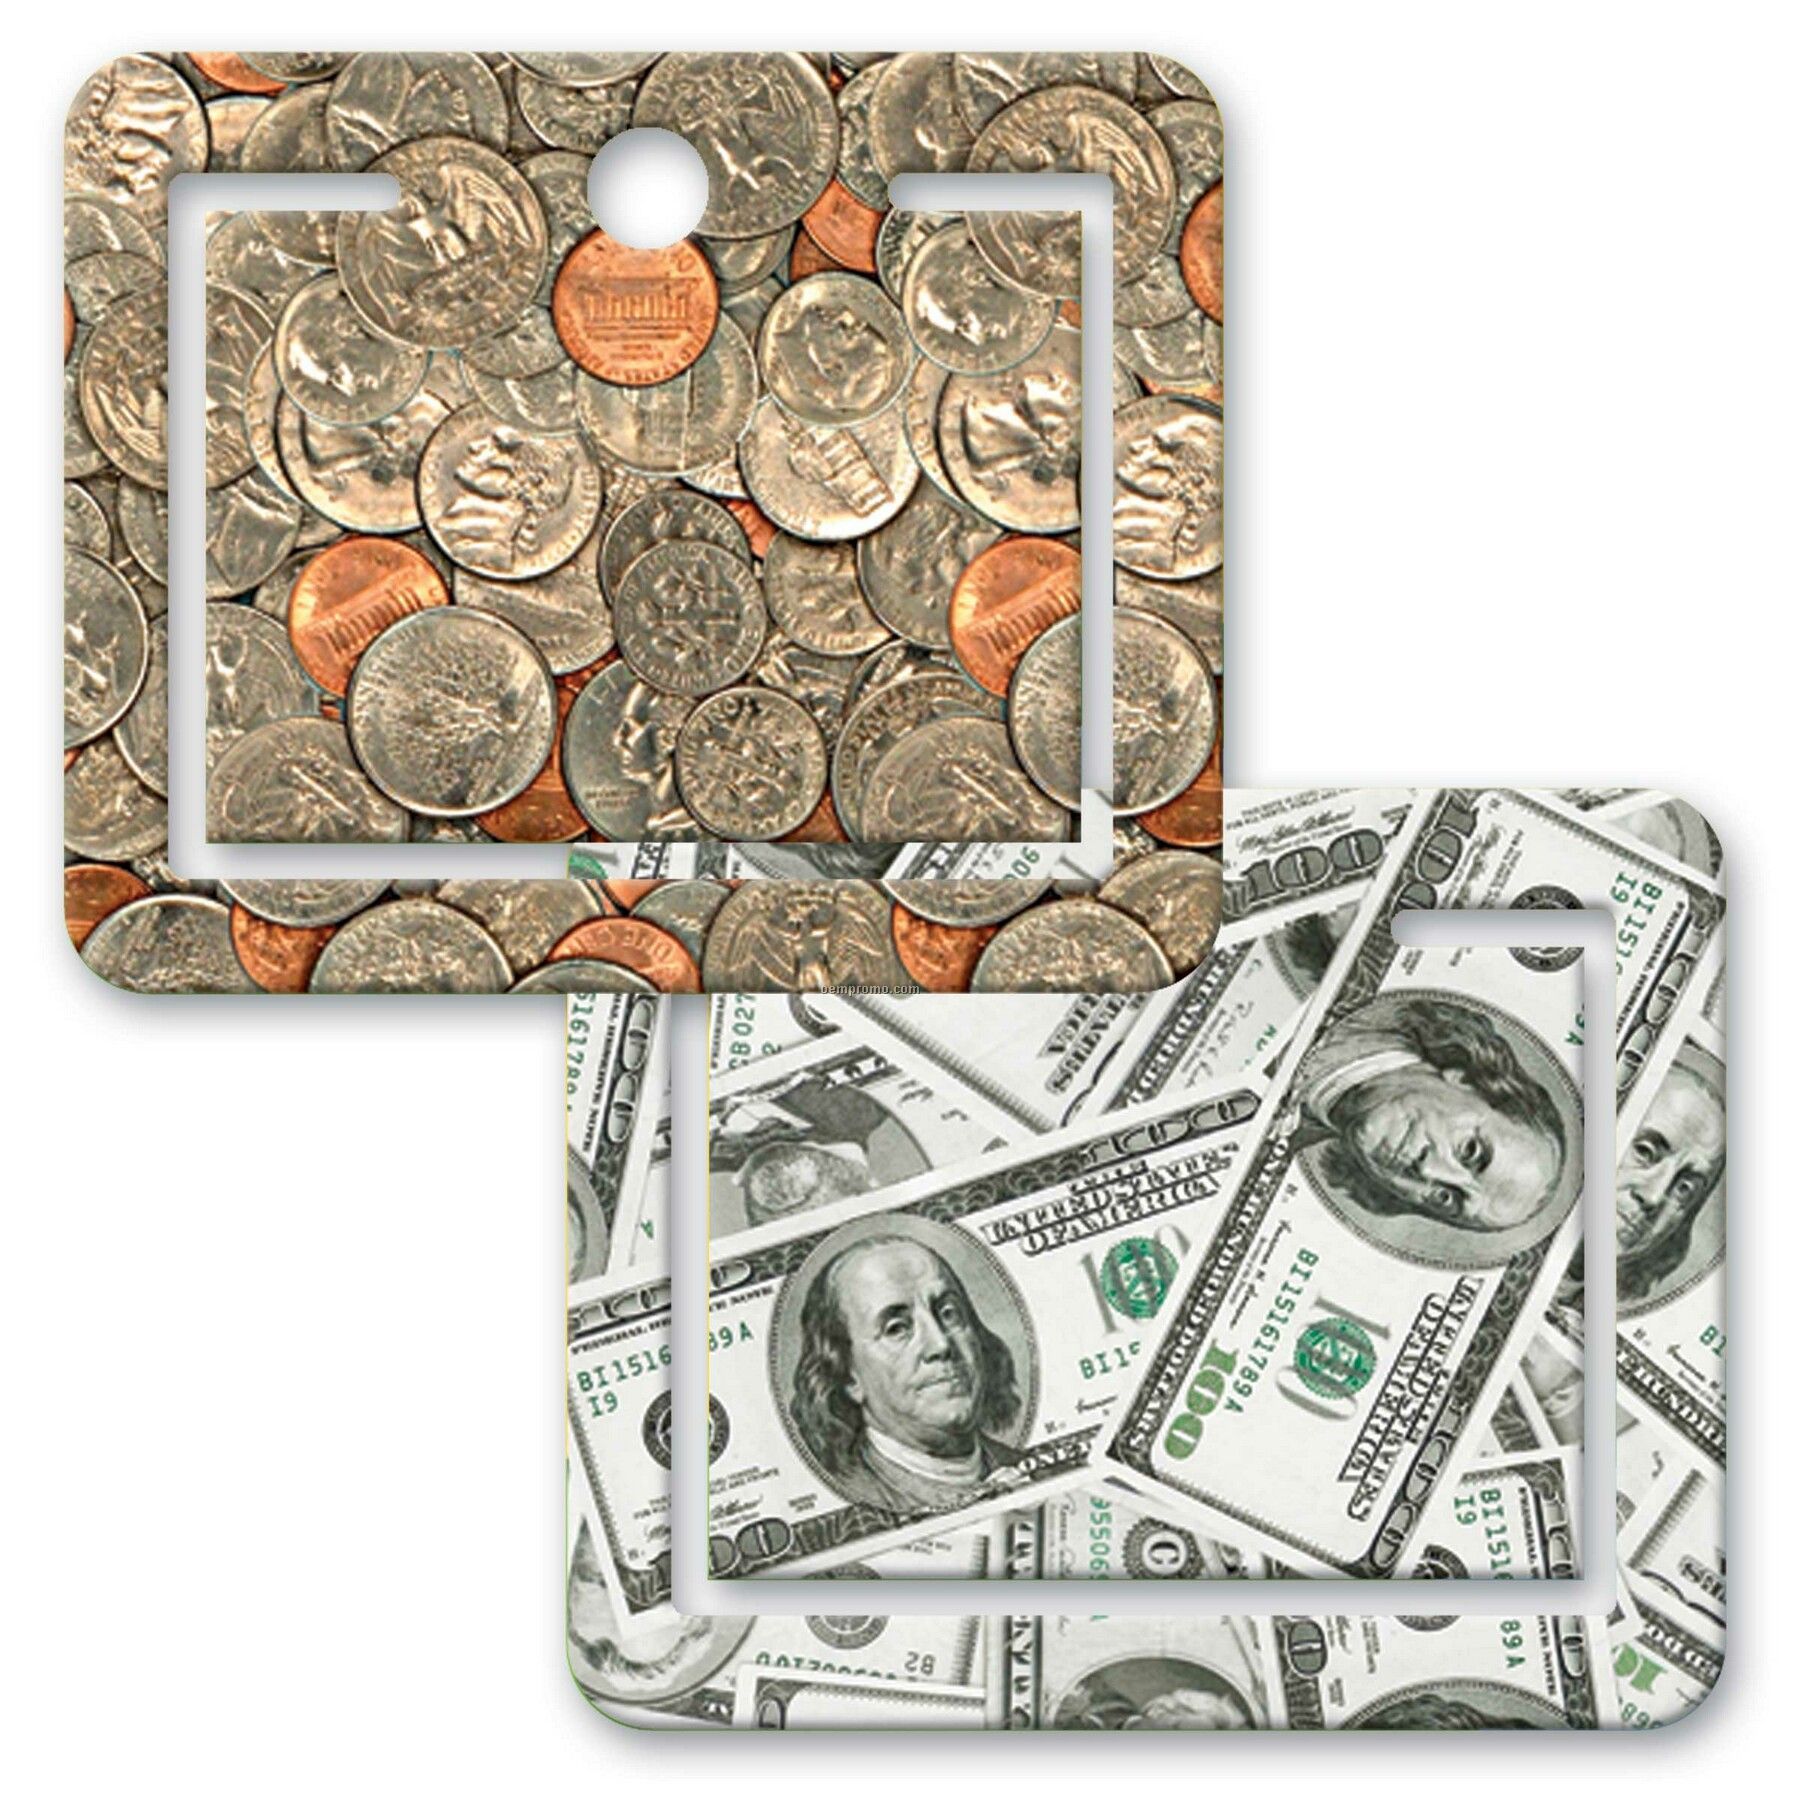 Paper Clip W/3d Lenticular Image Of Dollars And Cents ( Blanks)